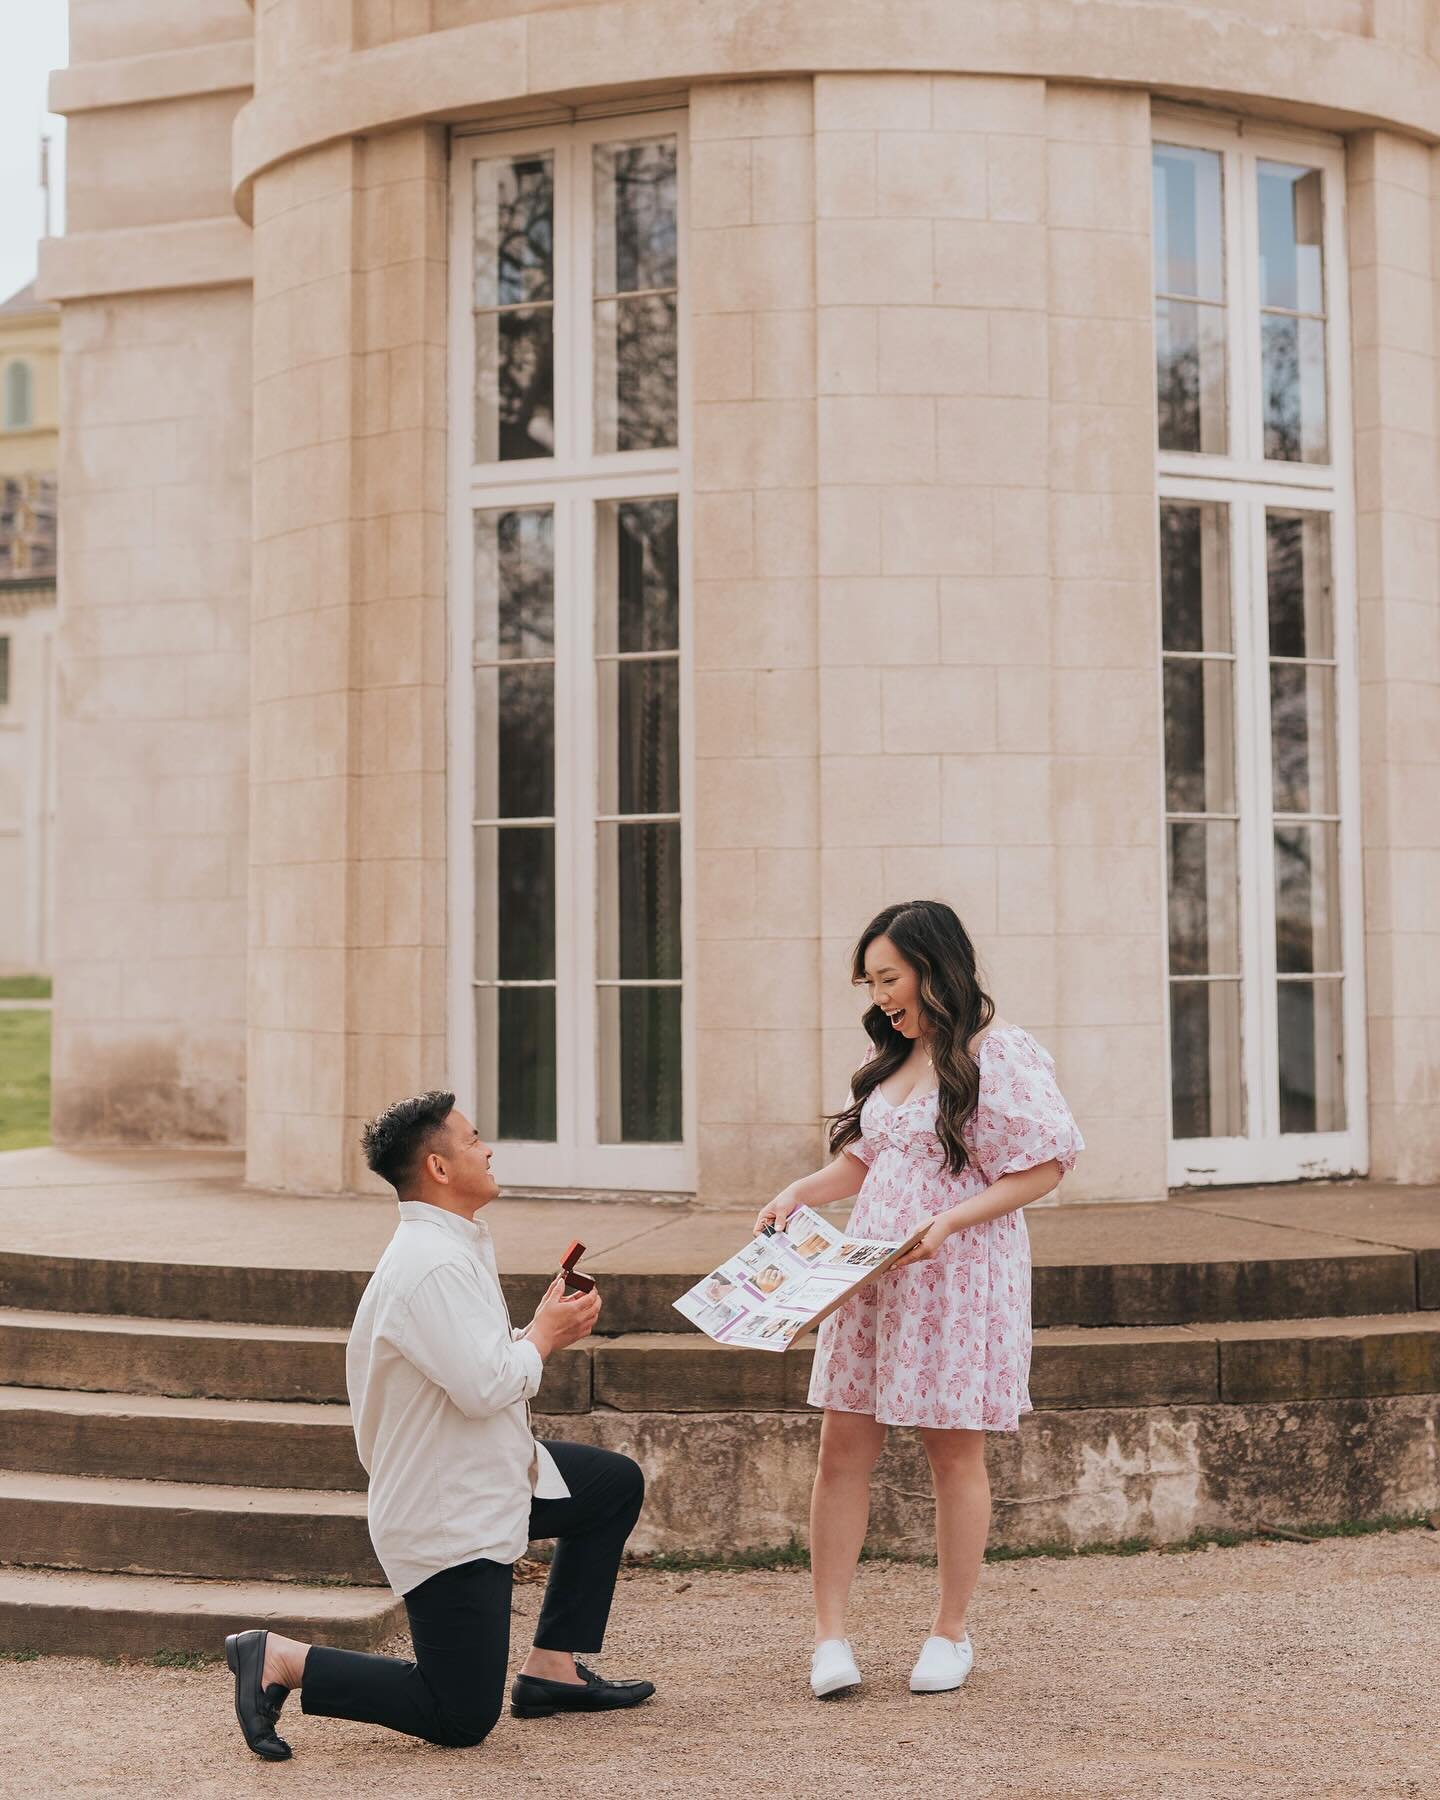 Congrats to Vanessa &amp; Yeng! 💍  From Detroit to Toronto -I am so happy to have captured this special moment for you both! 💜
.
.
#engaged #shesaidyes #engagedintoronto #detroit #torontoweddingphotographer #detroitwedding #hamiltonweddingphotograp